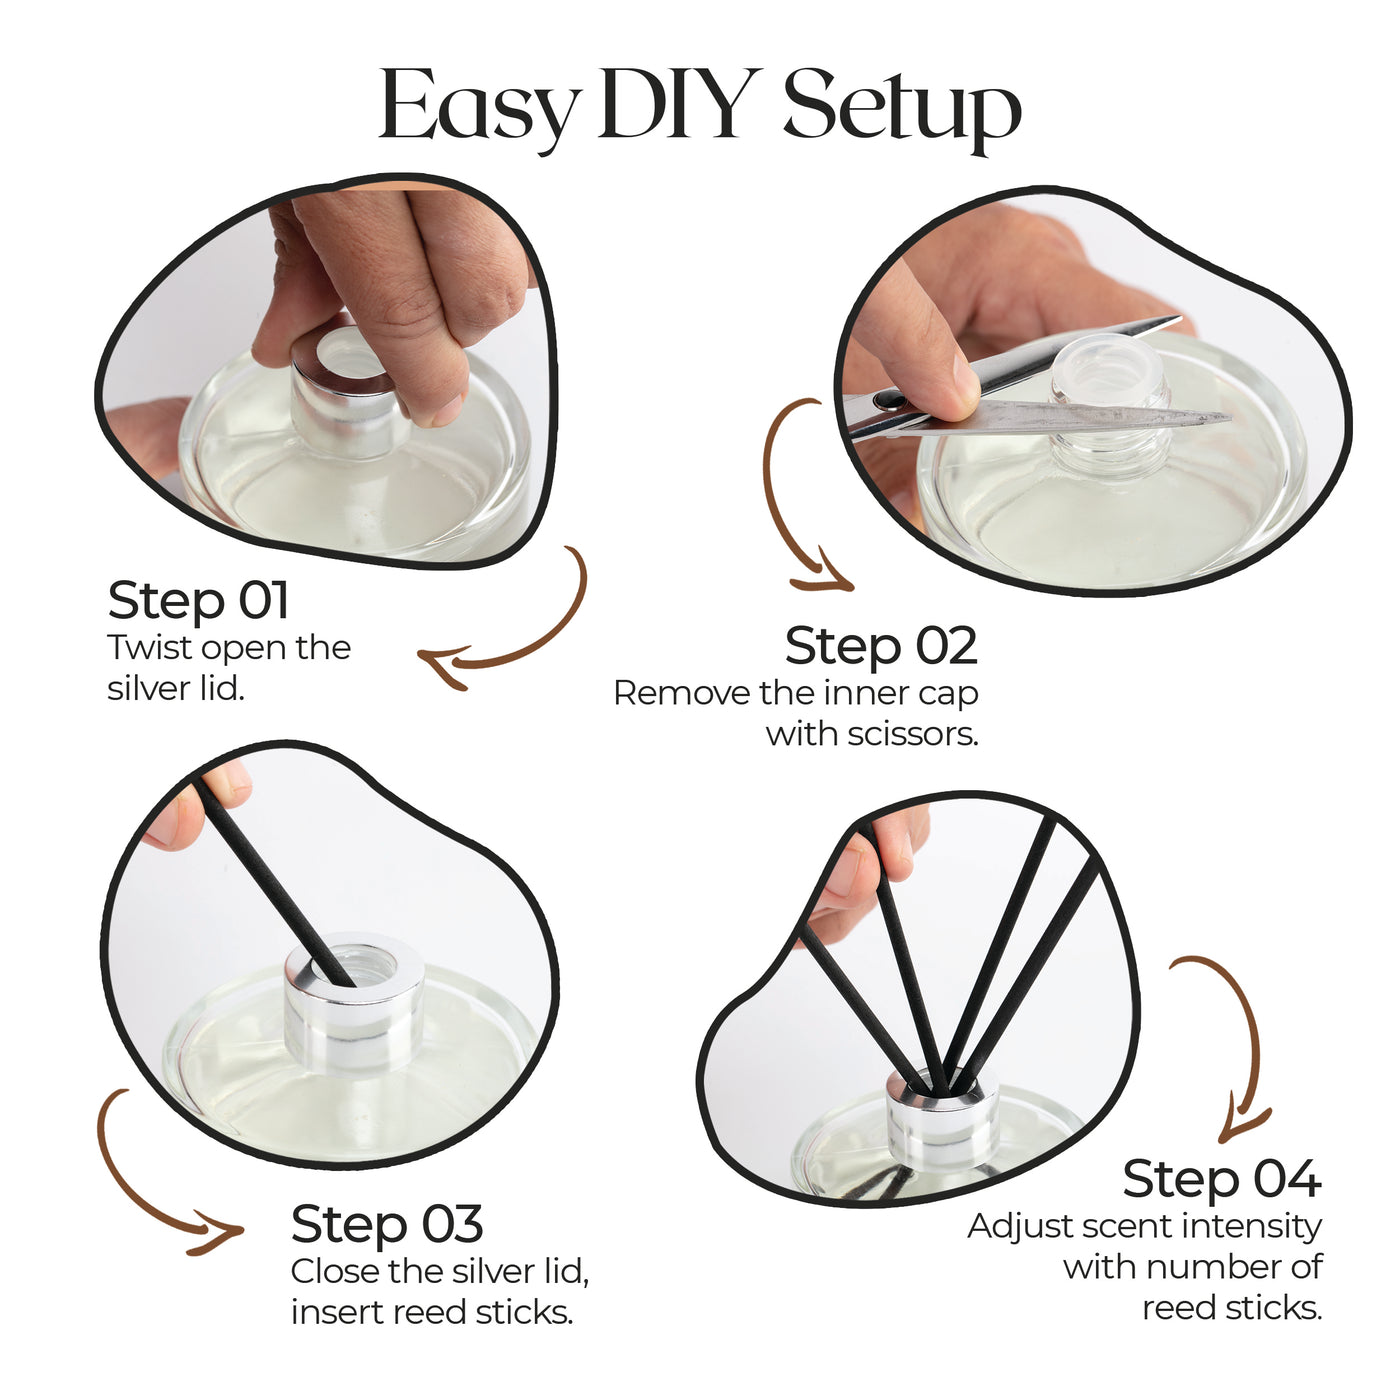 Four-part illustrated guide for setting up a Sweet Memoir reed diffuser, depicting the process from unboxing to enjoying the fragrance.